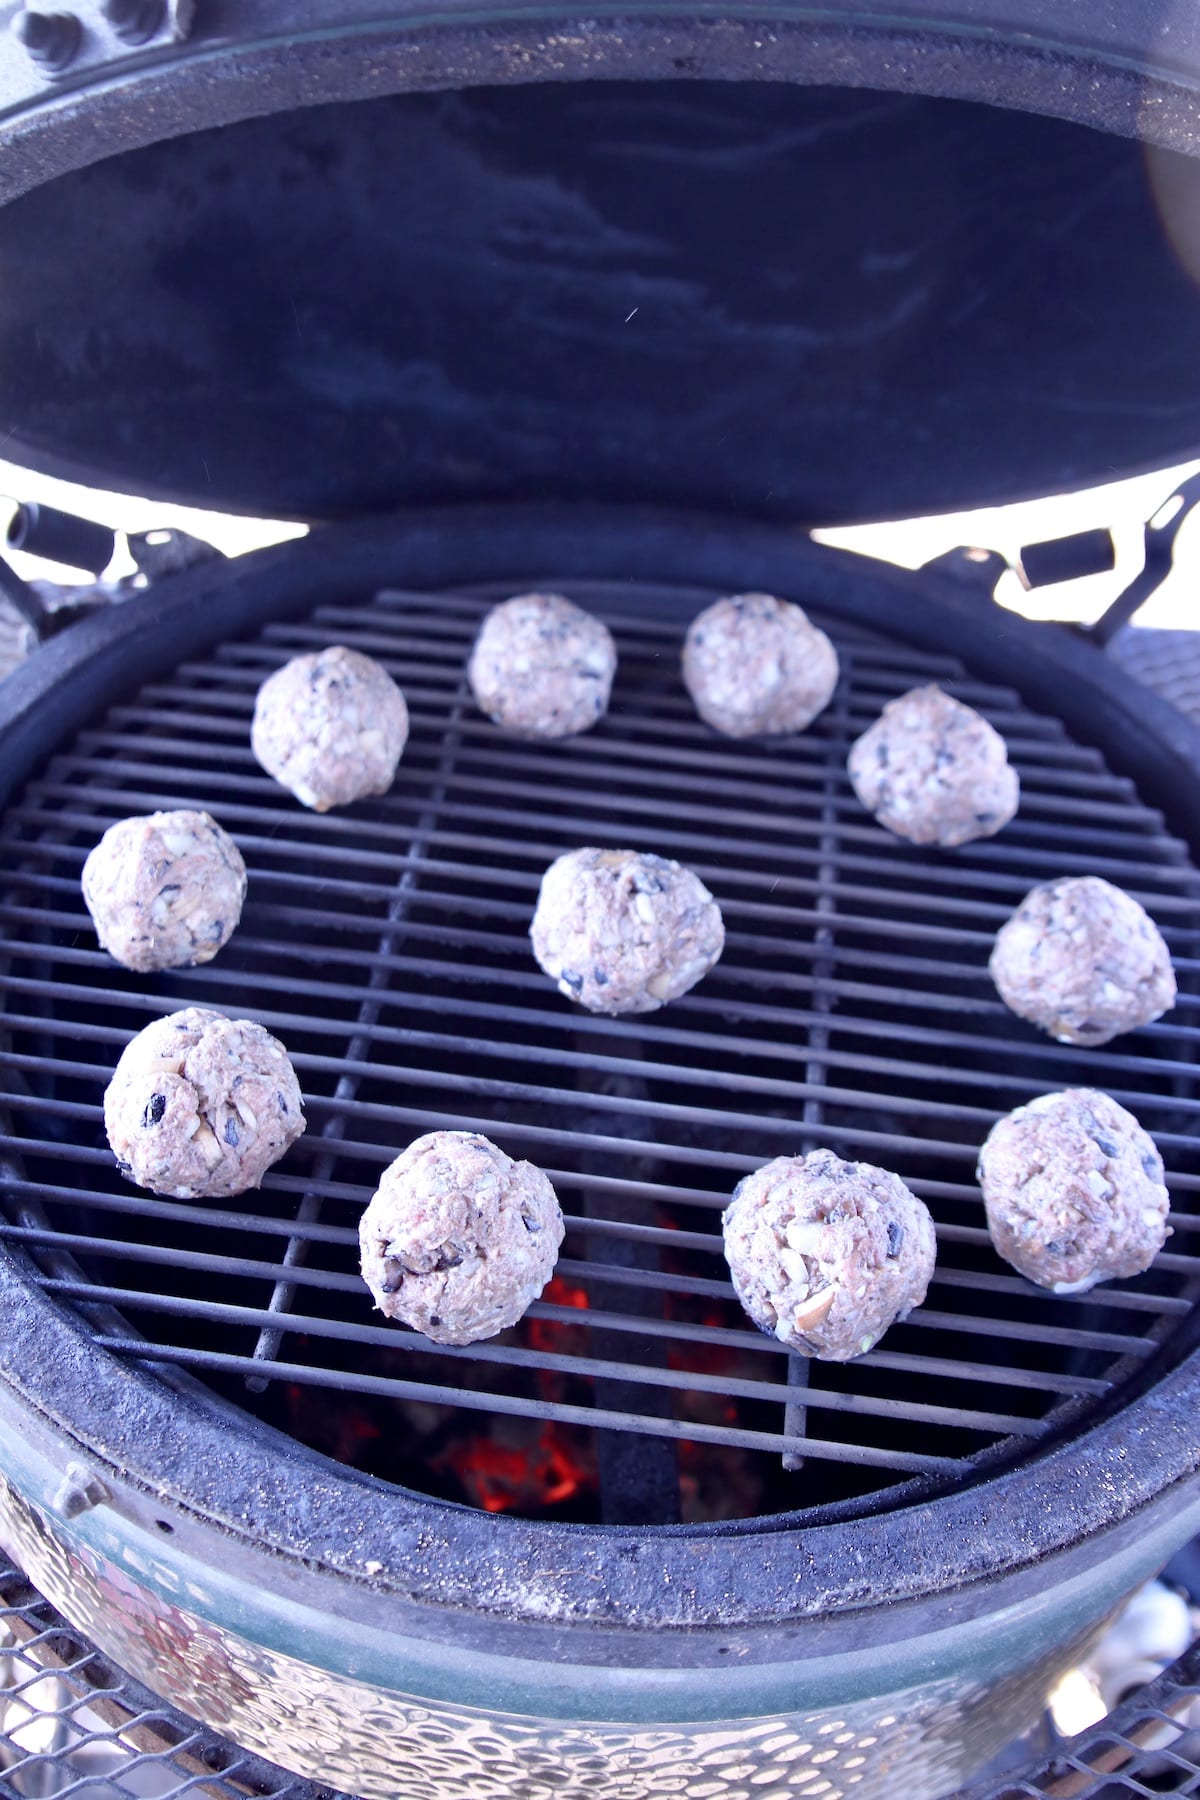 Meatballs on a round grill.